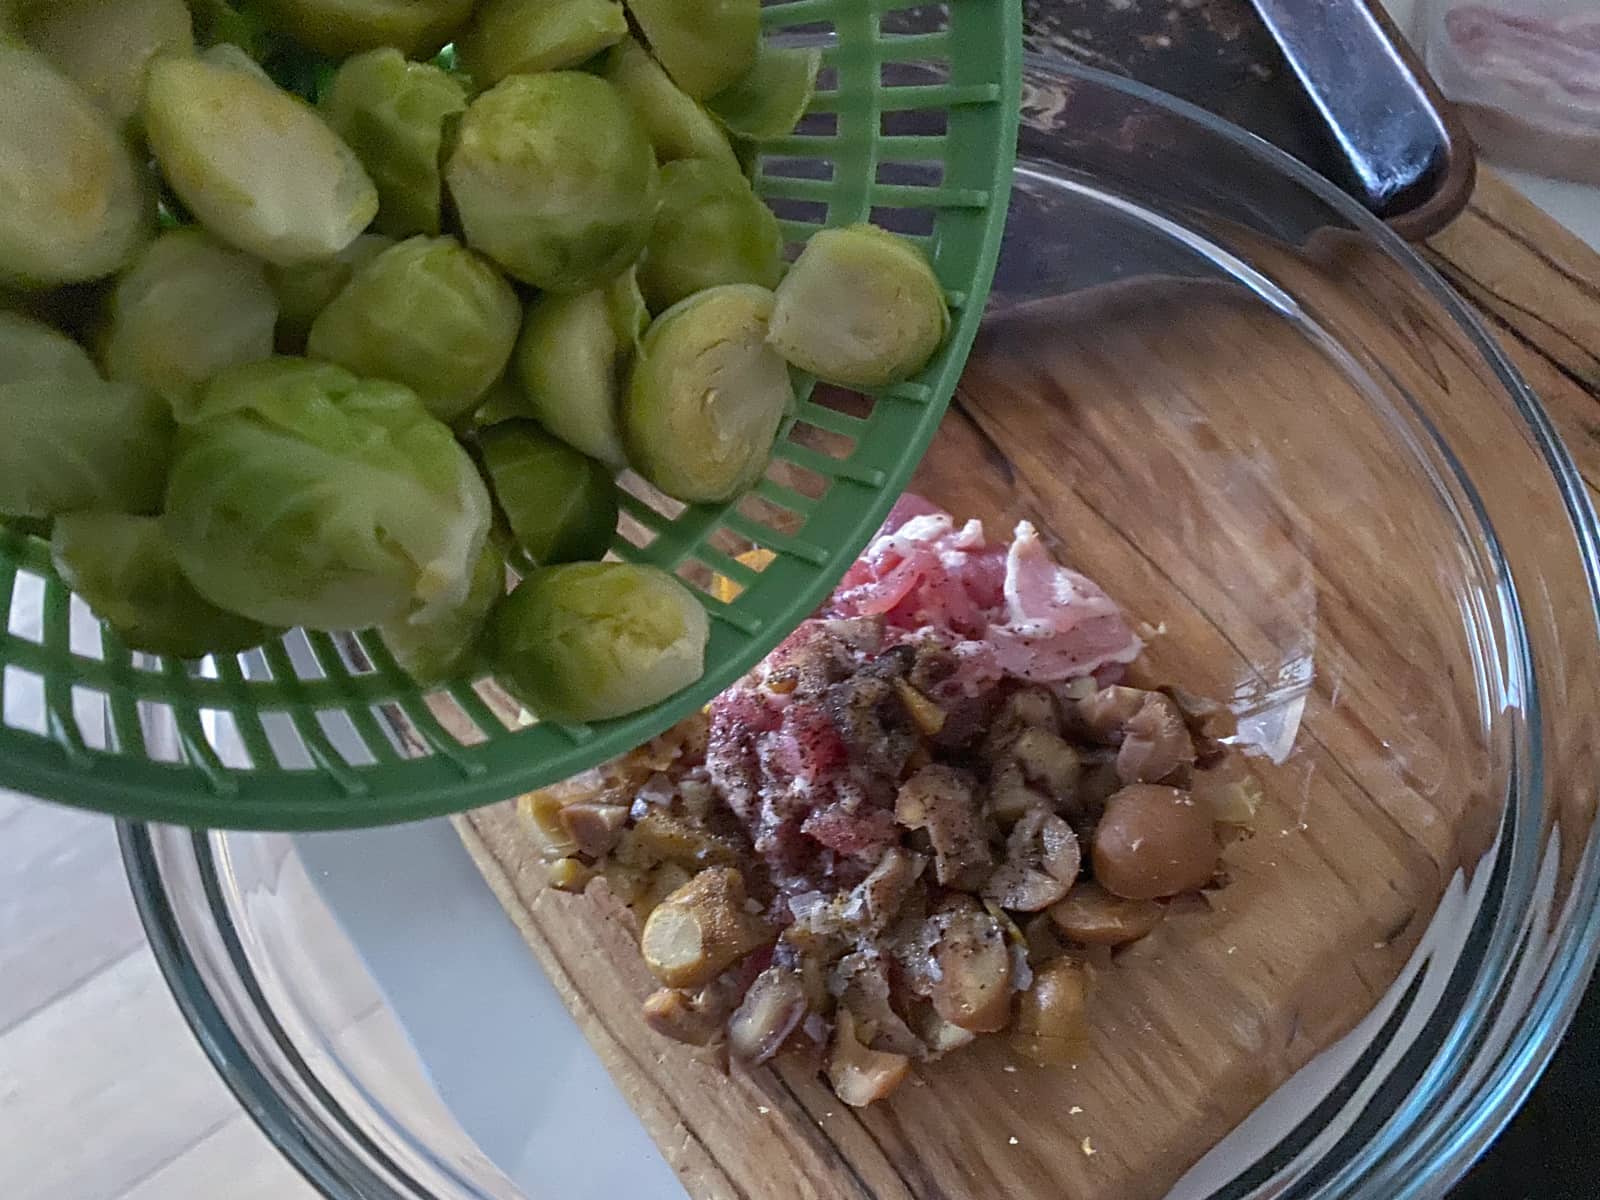 Par cooked sprouts added to seasoned bacon lardons and diced chestnuts.